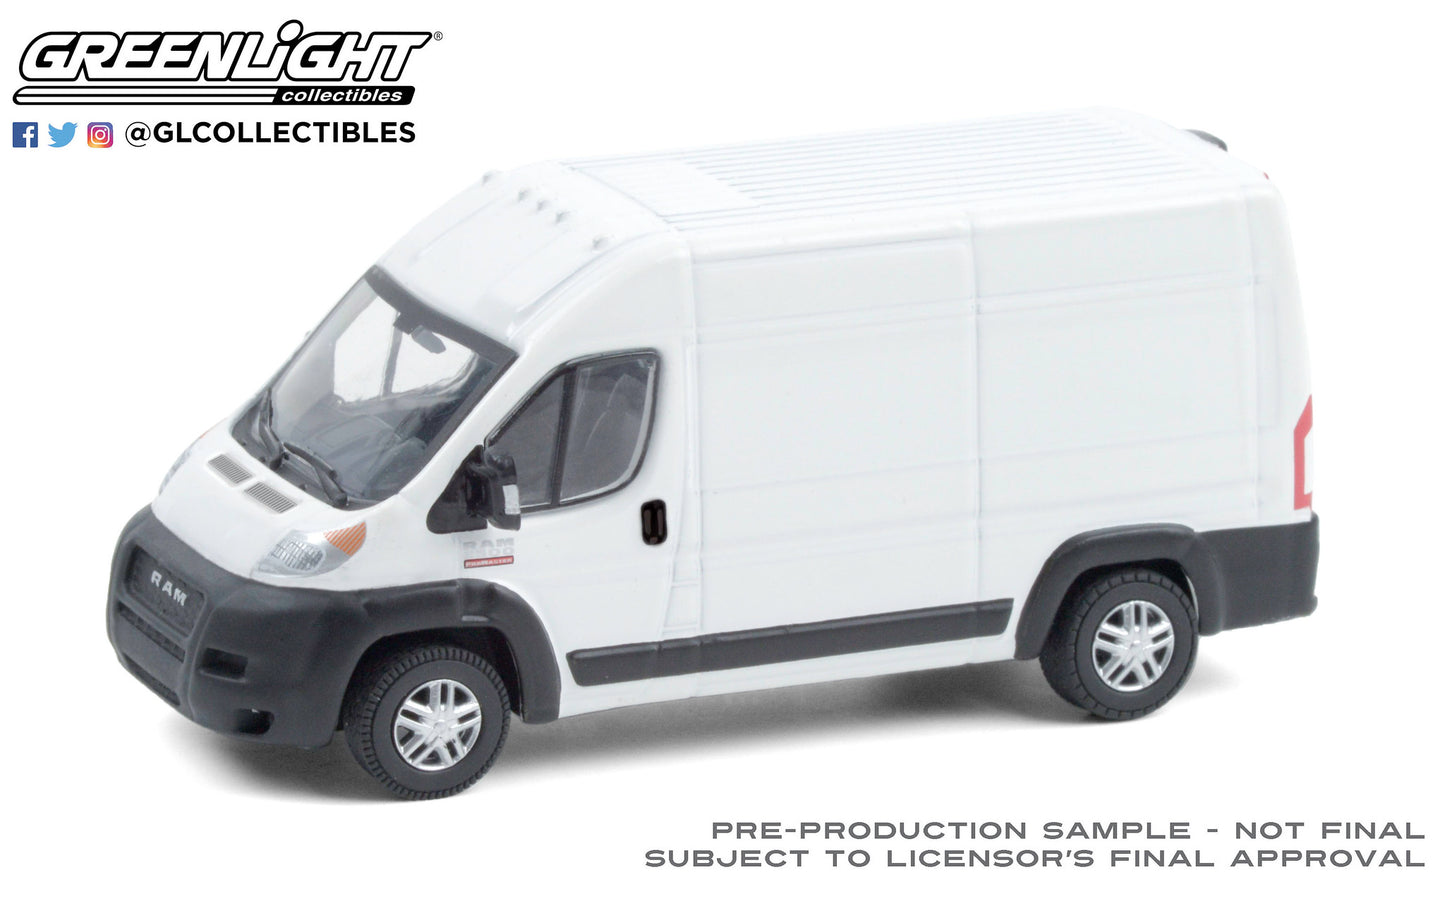 GreenLight 1:64 Route Runners Series 2 - 2019 Dodge Ram ProMaster 2500 Cargo High Roof - Bright White 53020-F